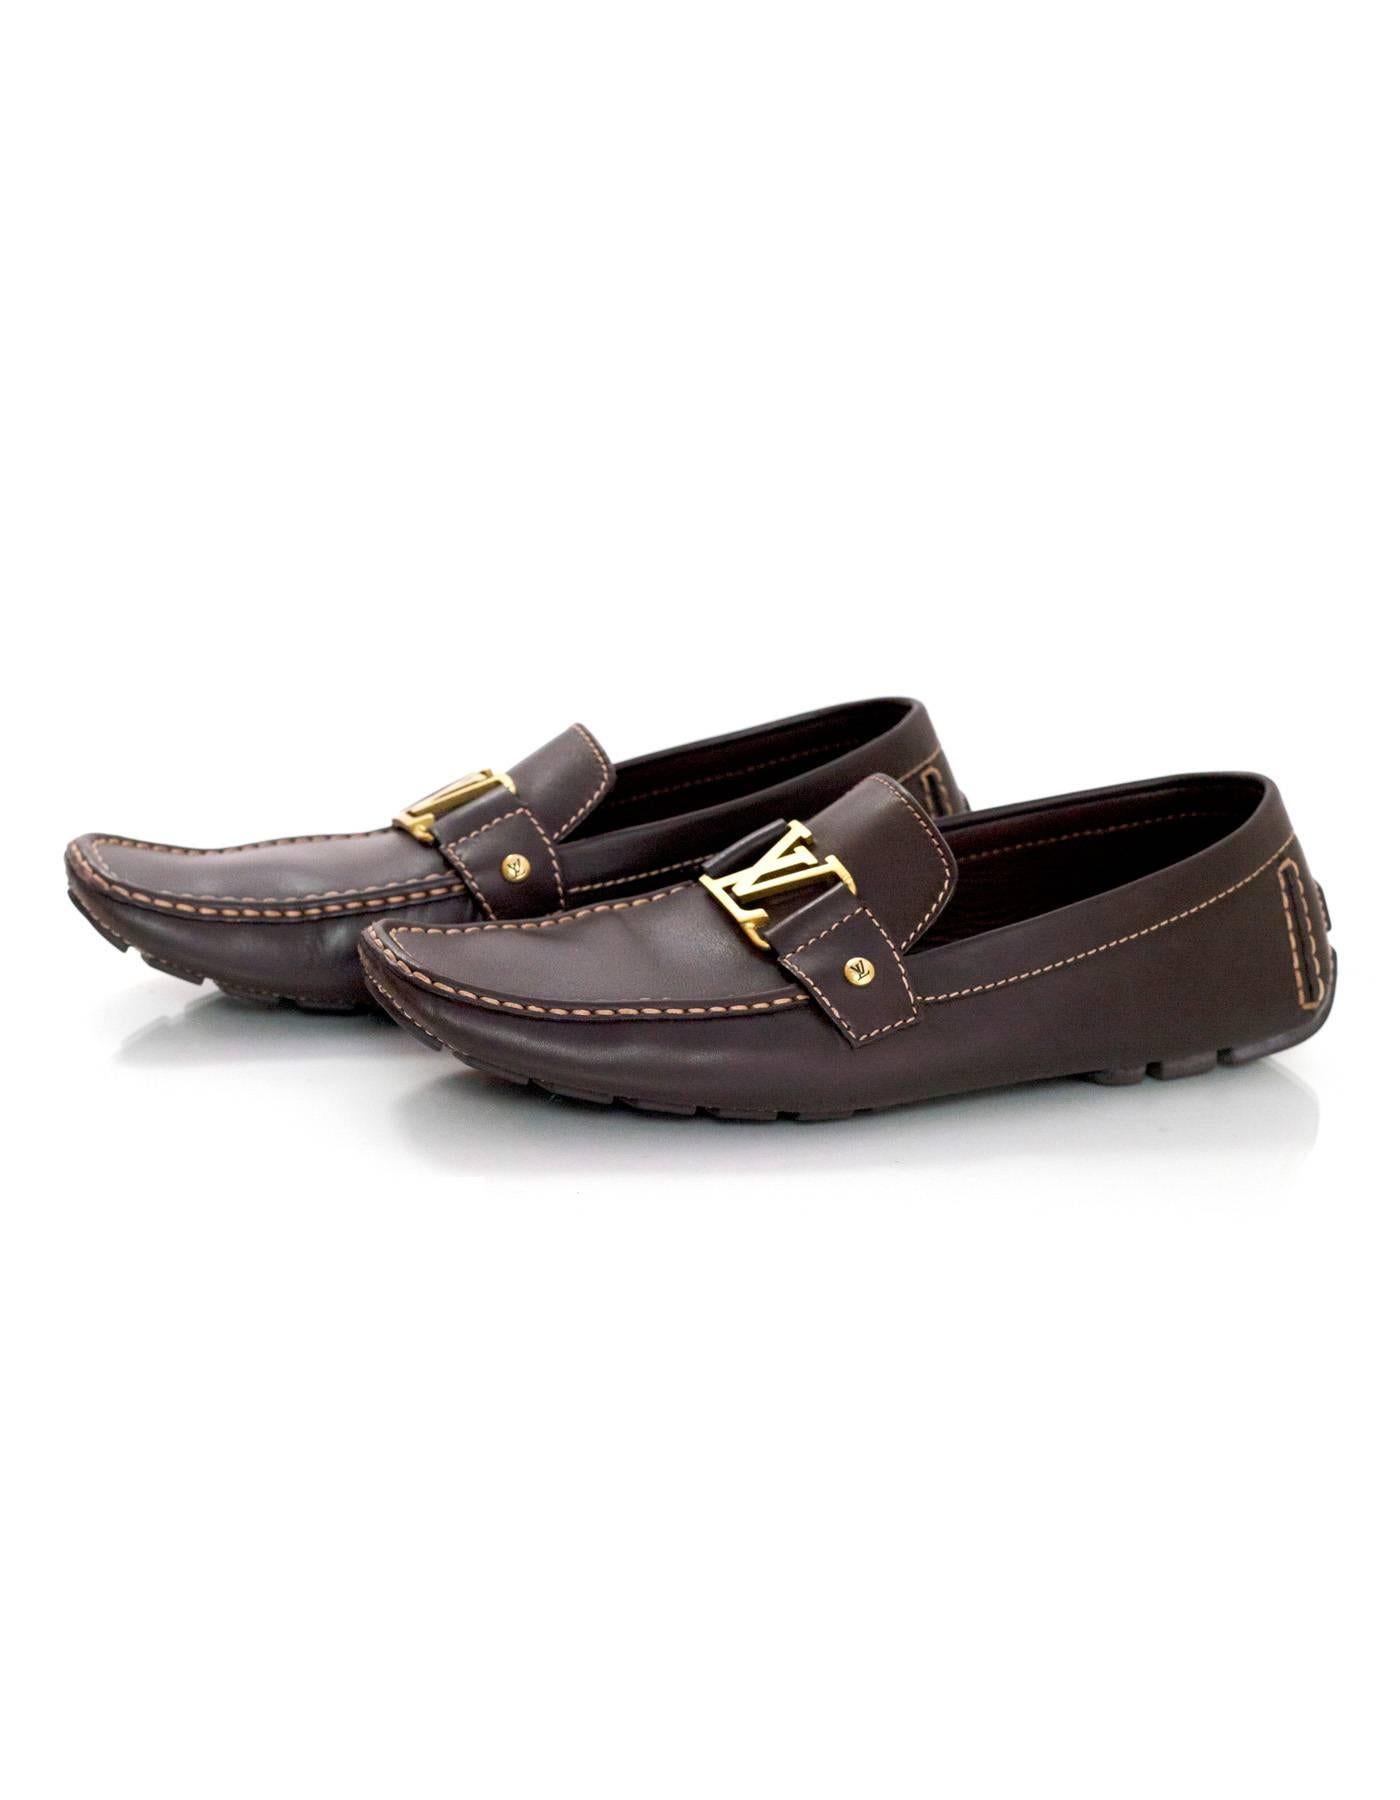 Louis Vuitton Men's Brown Leather Monte Carlo Car Shoes 
Features goldtone LV at top of shoe tongue

Made In: Italy
Year of Production: 2006
Color: Brown
Materials: Calf leather
Closure/Opening: Slide on
Sole Stamp: Louis Vuitton
Insole Stamp: FA